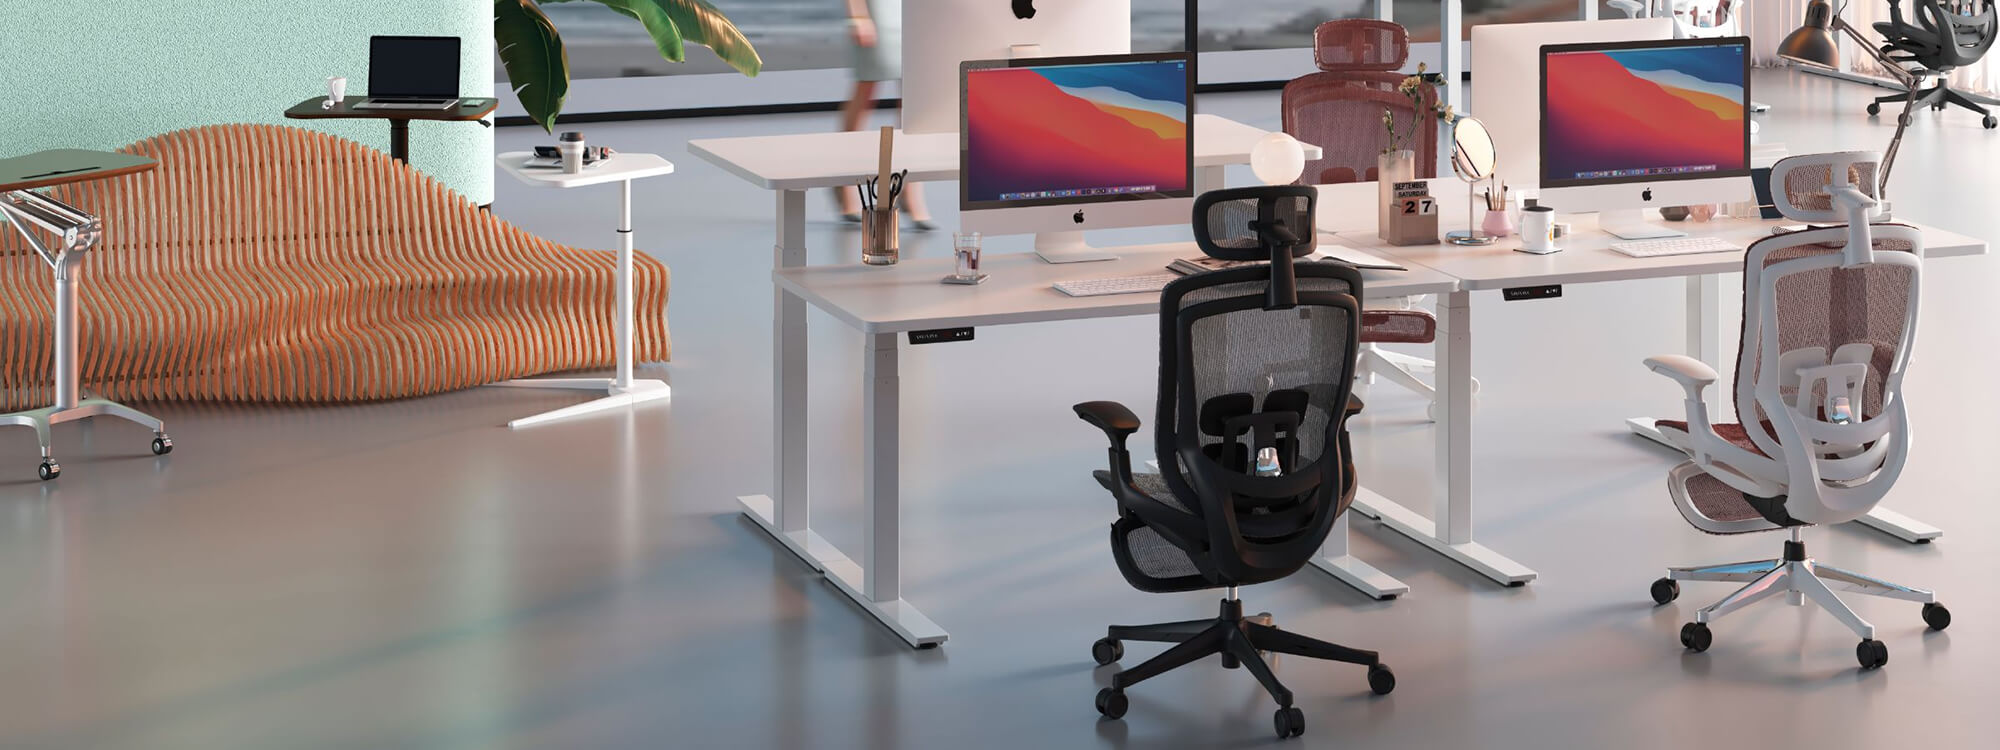 The three - and two-person workstations in the office have five black office chairs.